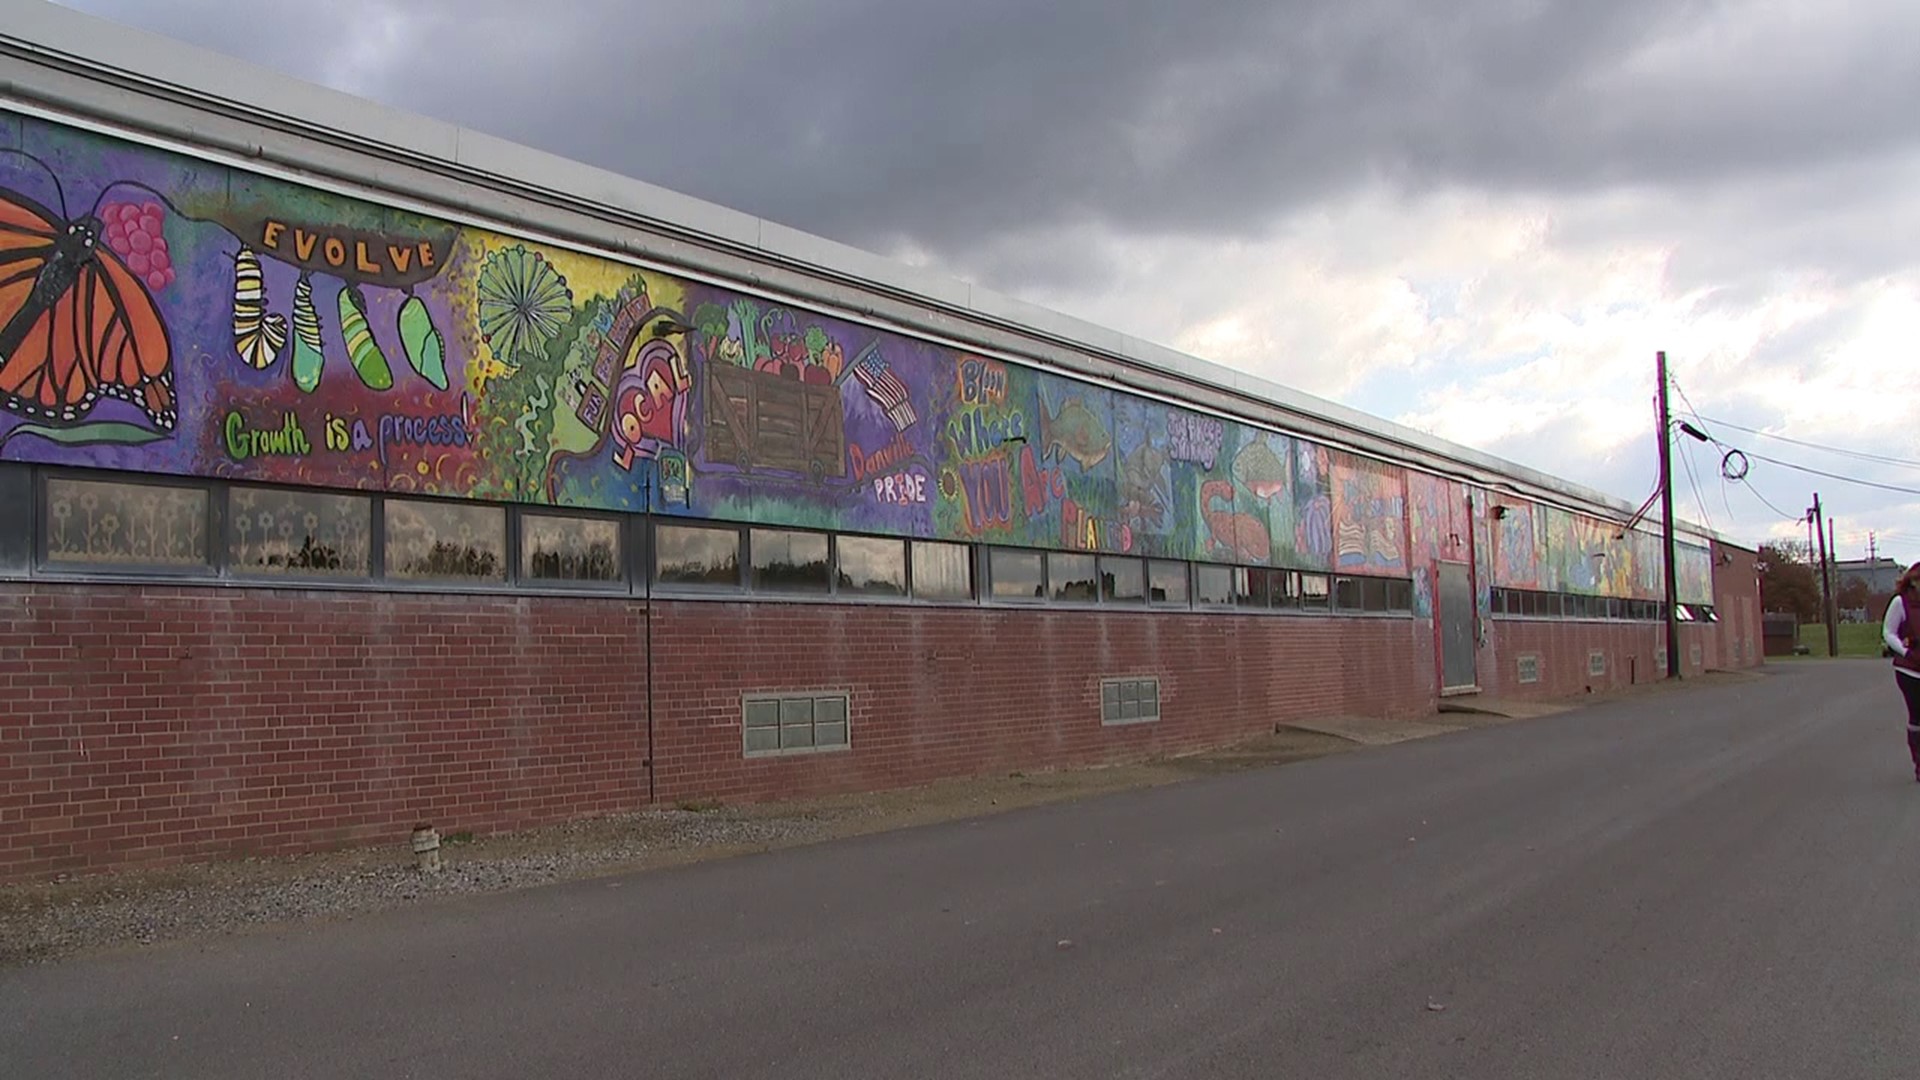 Danville Area Middle School recently became a bit brighter as students painted a mural on the outside of the building.